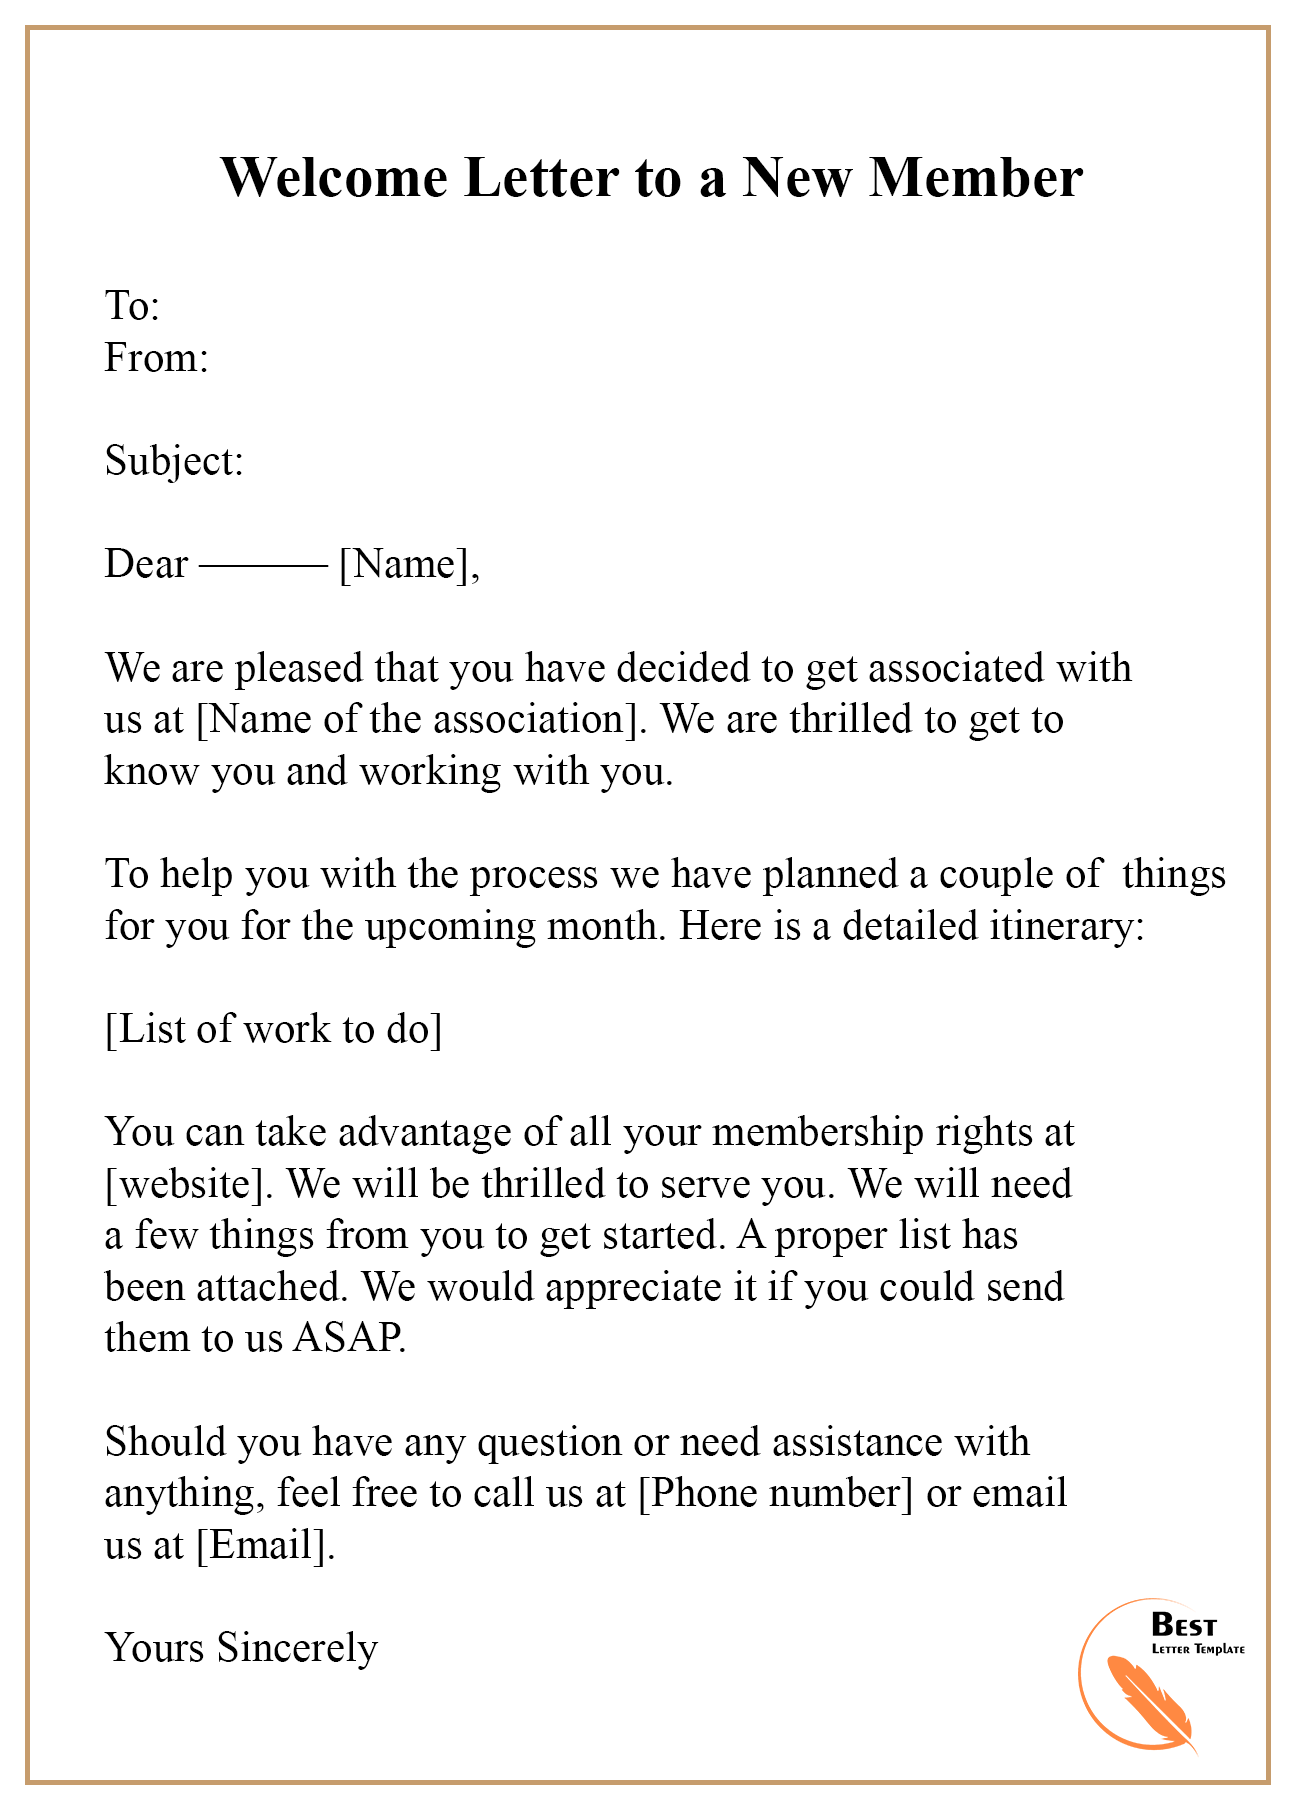 New Board Member Orientation Welcome Letter Template from bestlettertemplate.com